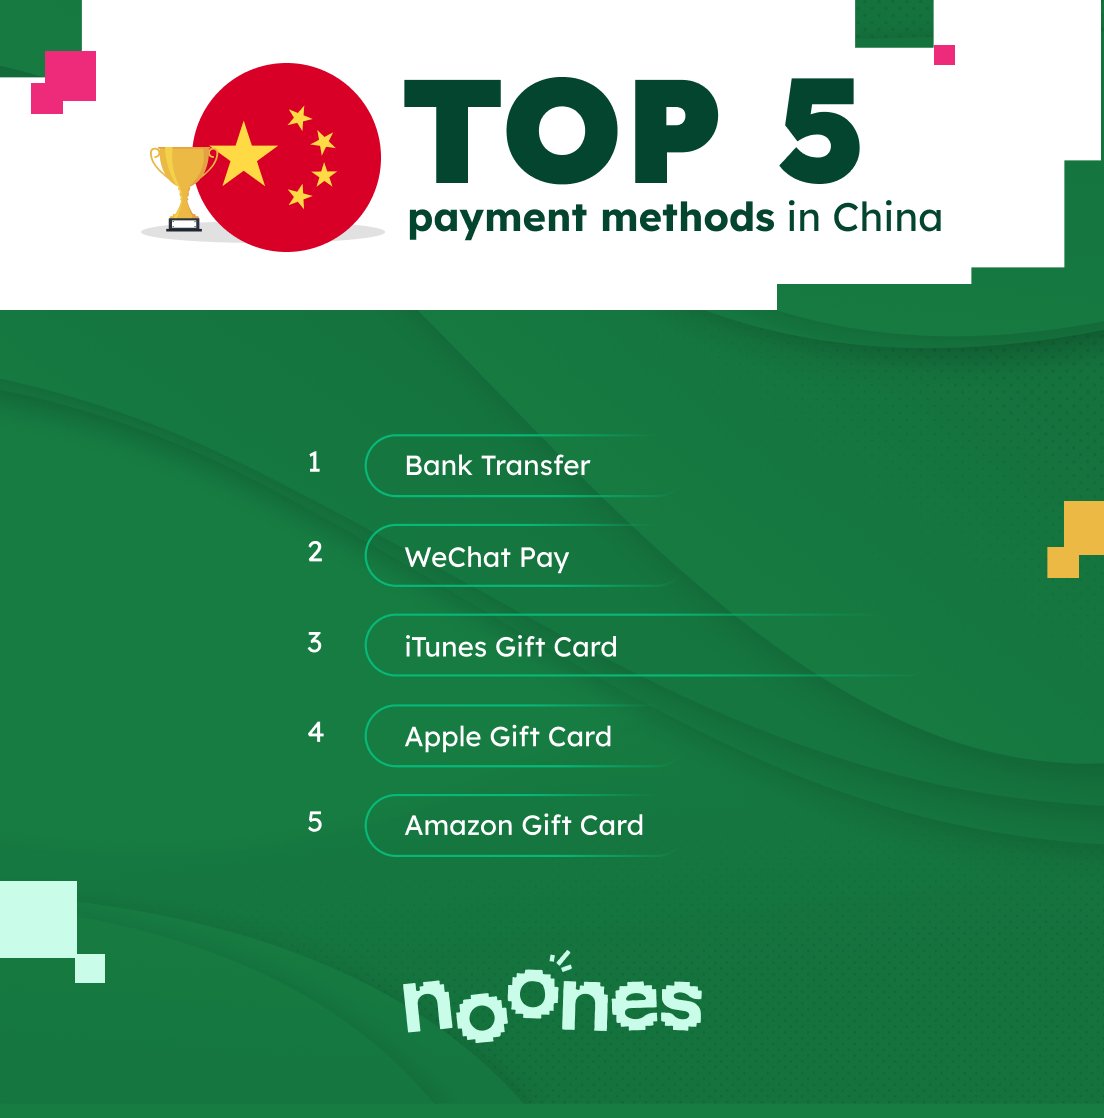 🇨🇳💰 Exploring the top payment methods in China for January 2024! Check them out:

1. 💳 Bank Transfer
2. 📱 WeChat Pay
3. 🎵 iTunes Gift Card
4. 🍏 Apple Gift Card
5. 📦 Amazon Gift Card

Stay in the know for all your financial transactions! #China #PaymentMethods #Finance2024